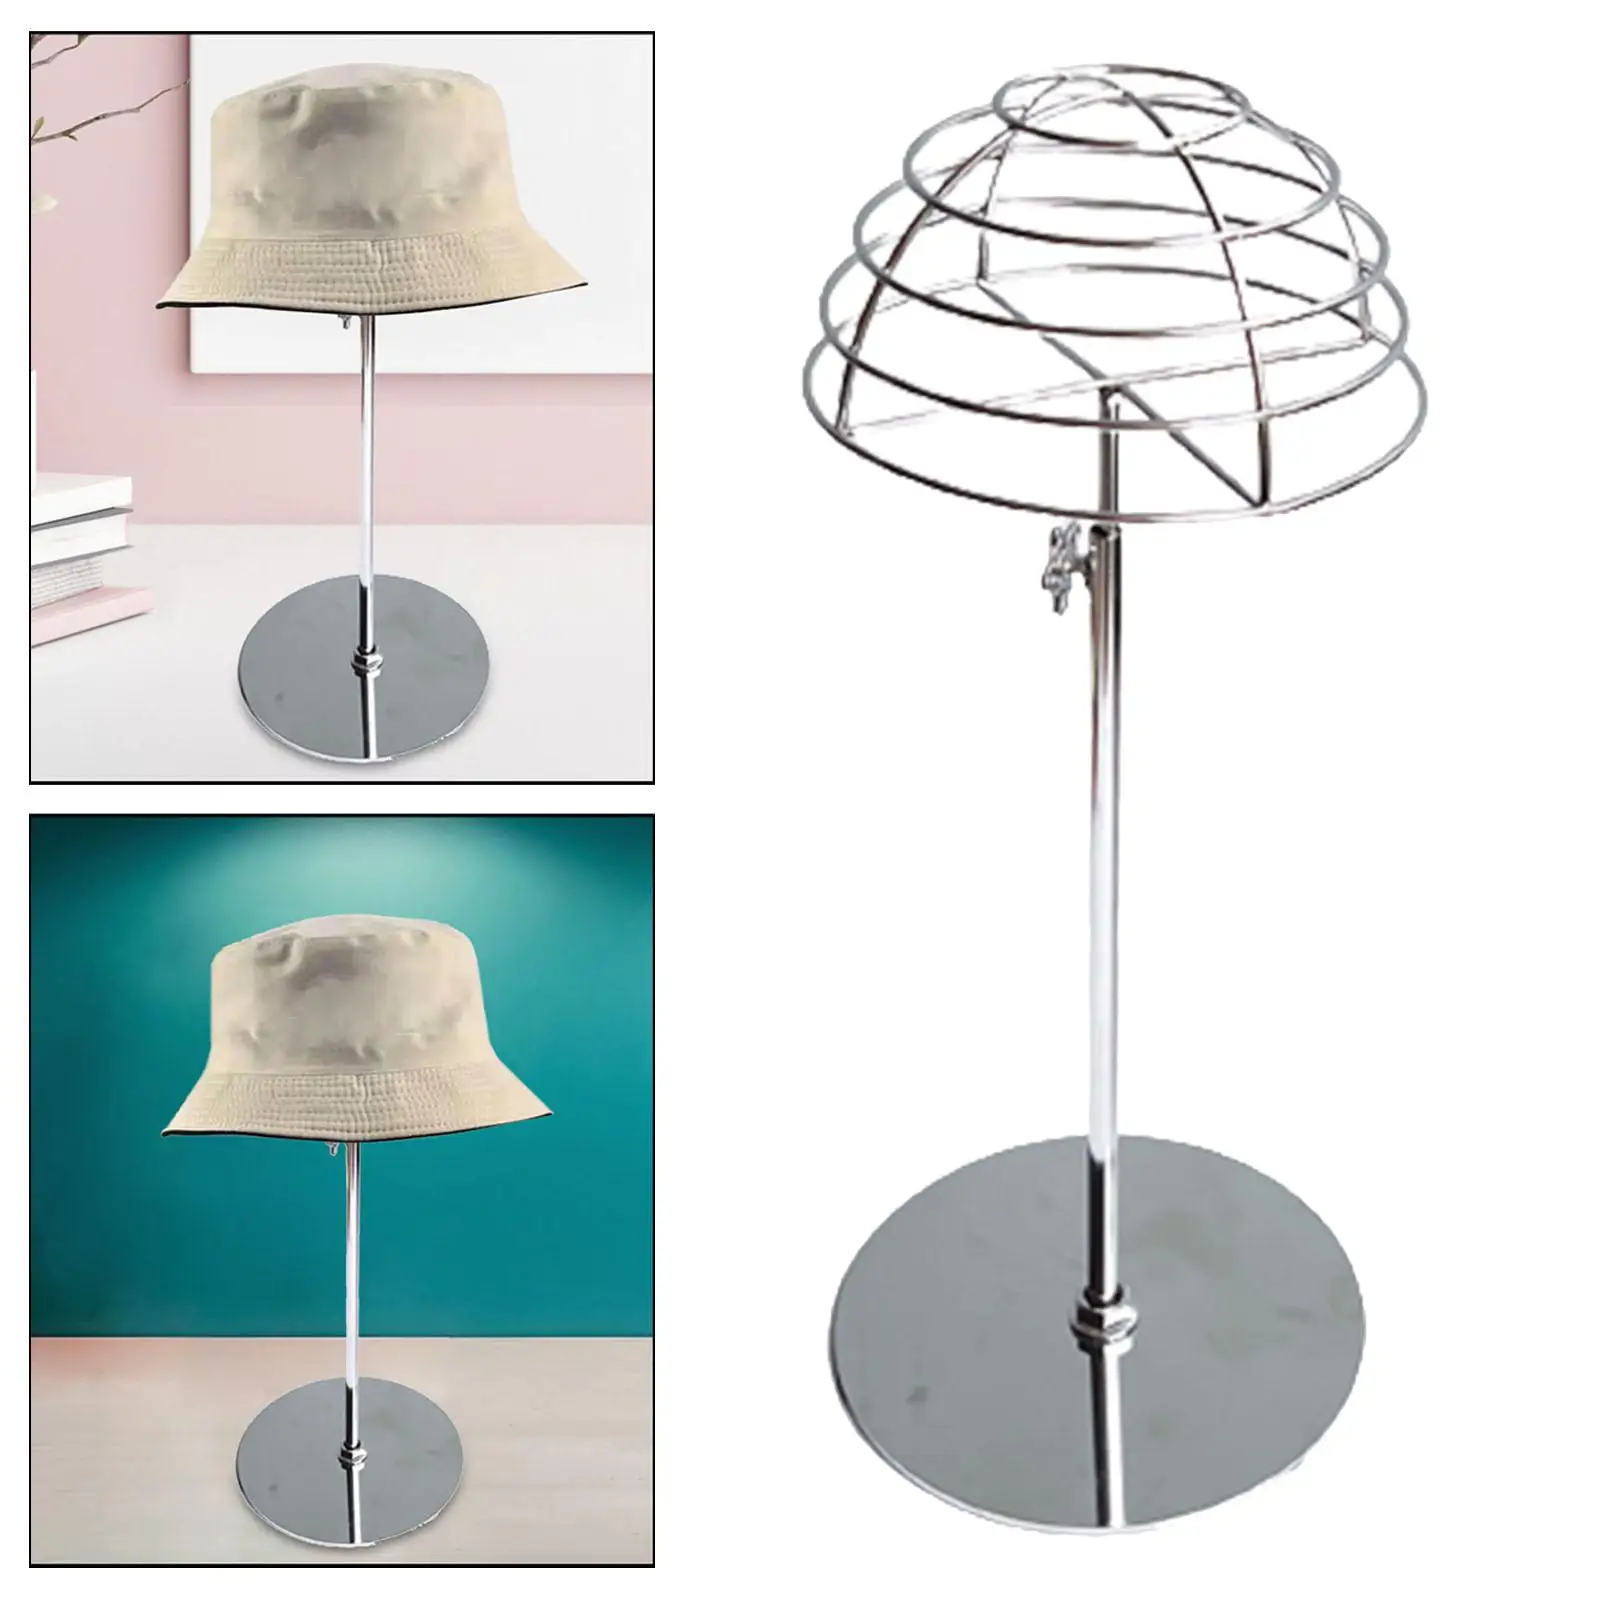 Hat Display Stand Tabletop Portable Durable Stable Hat Holder for Decoration Home Use